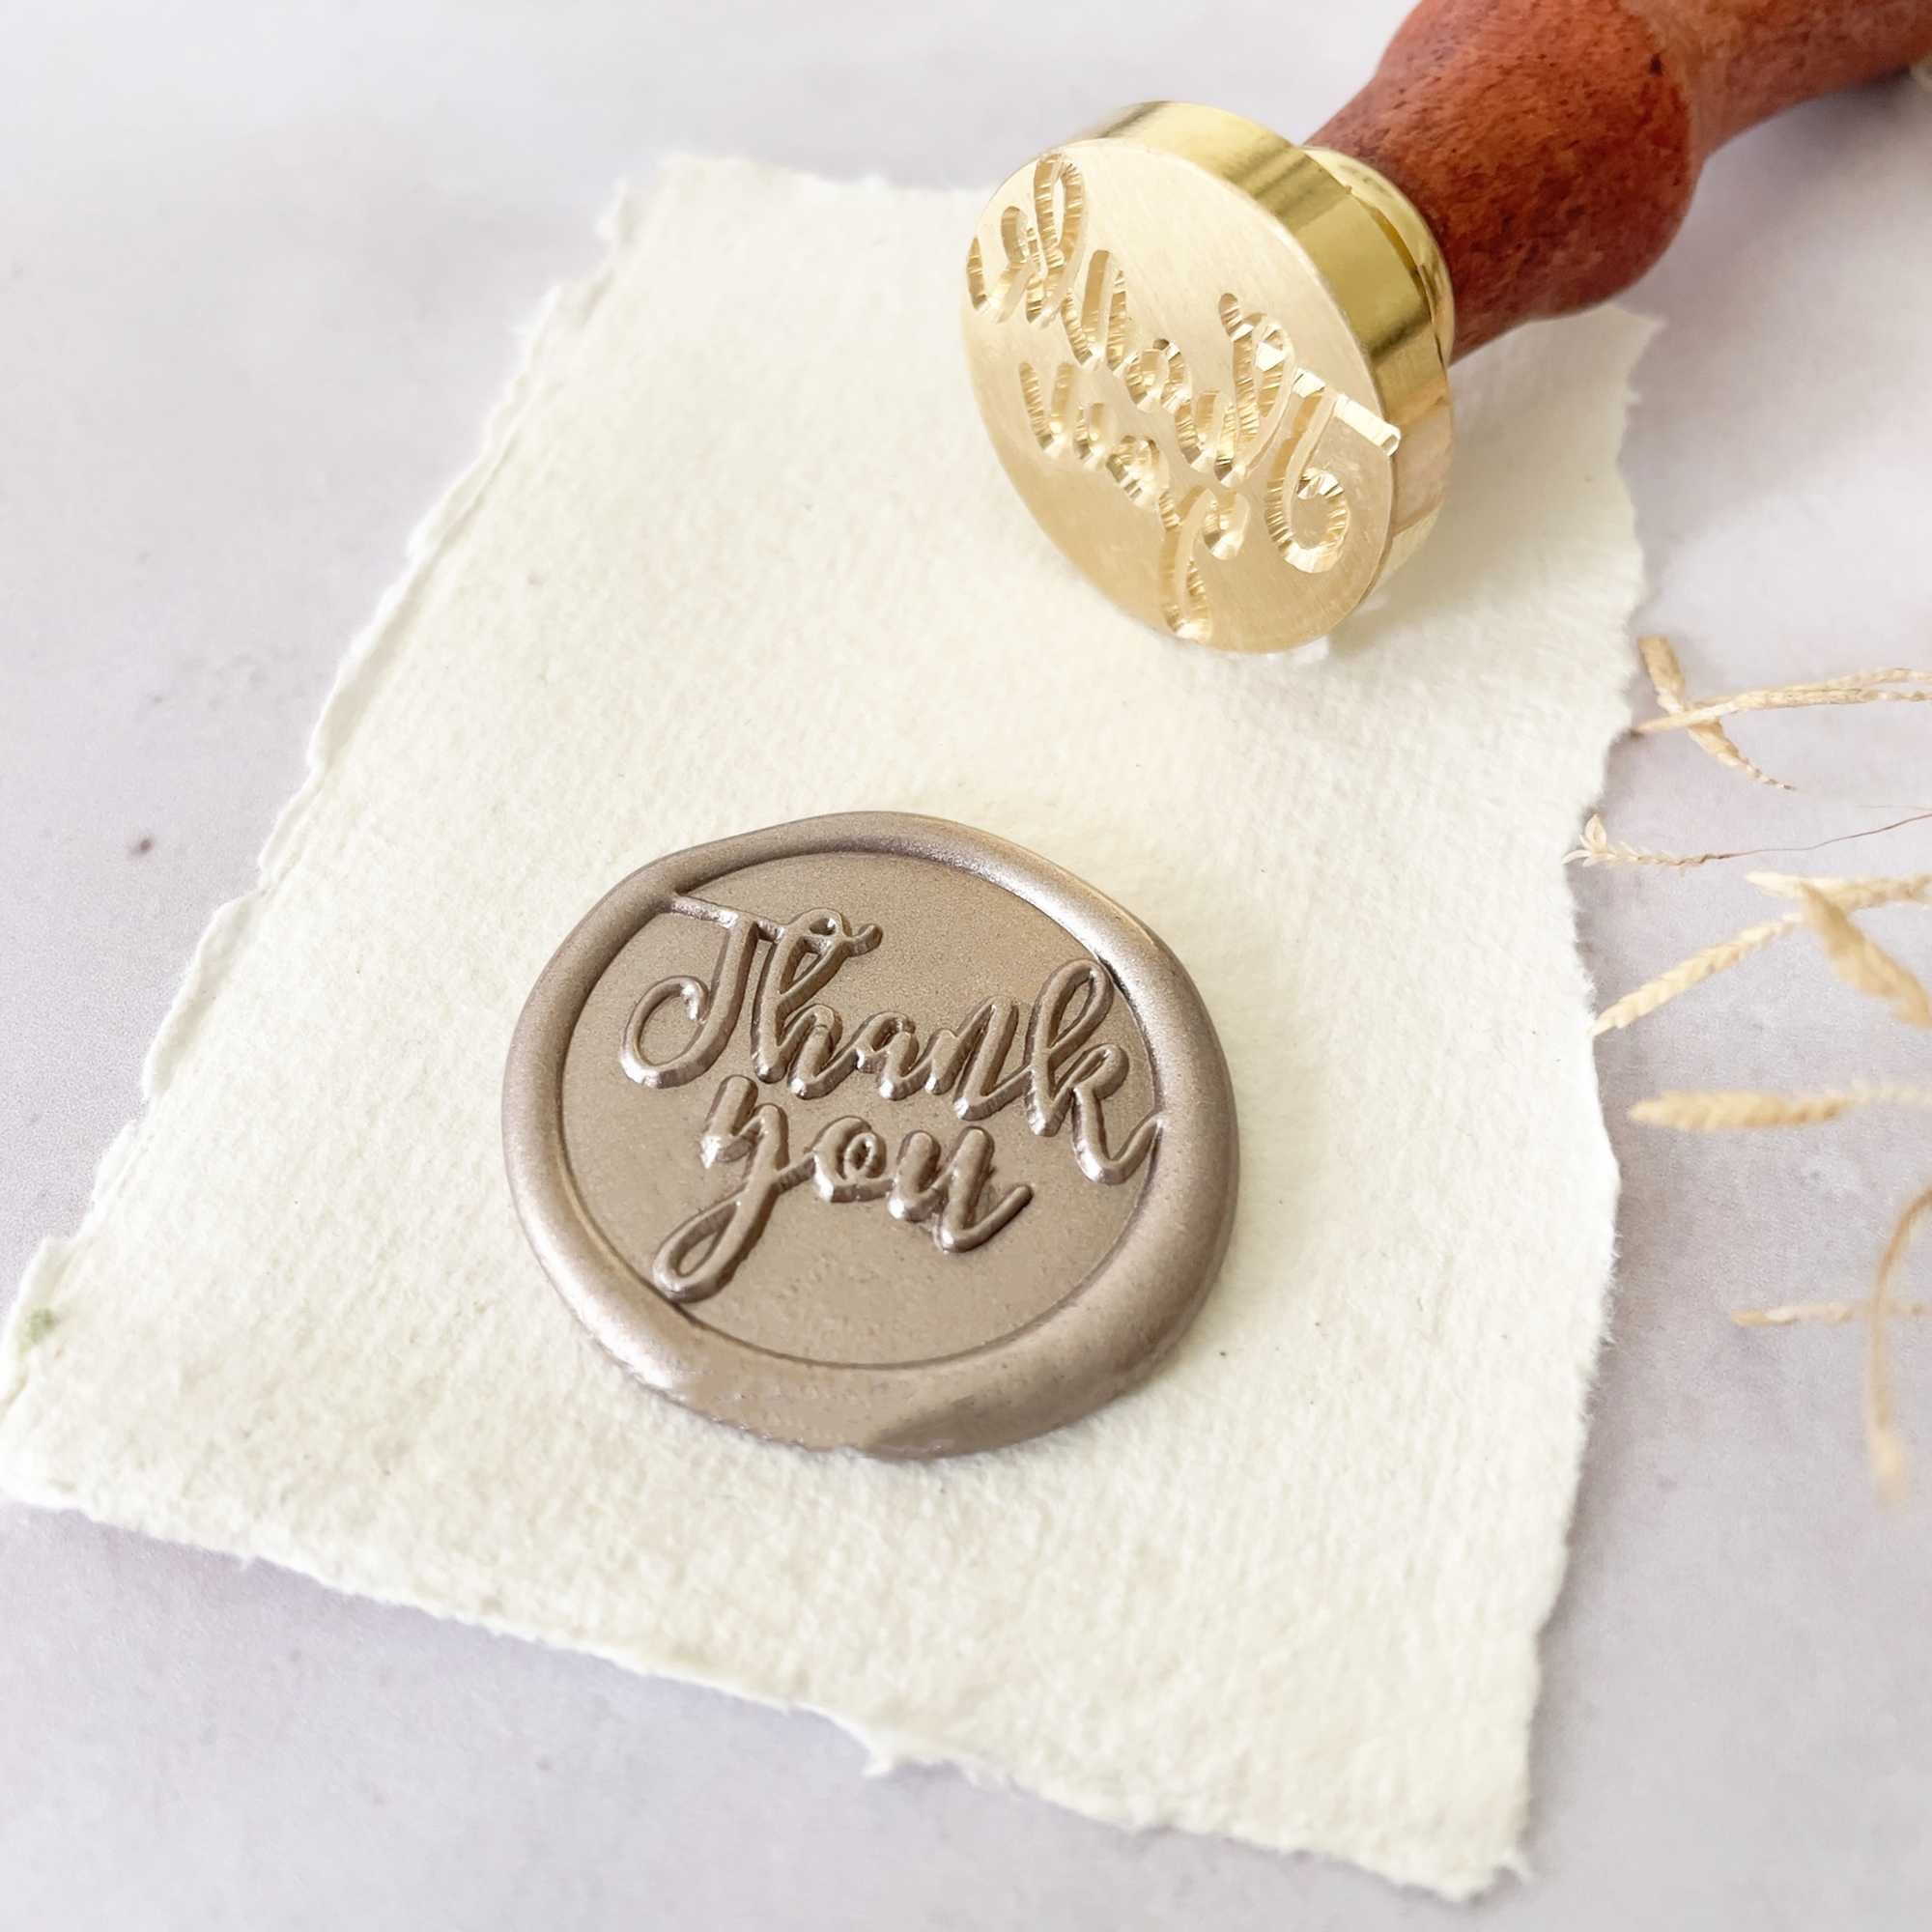 THANK YOU Wax Seal Sticker, Wax Label, Envelope Seals, Self-Adhesive –  Cottage Tent Event